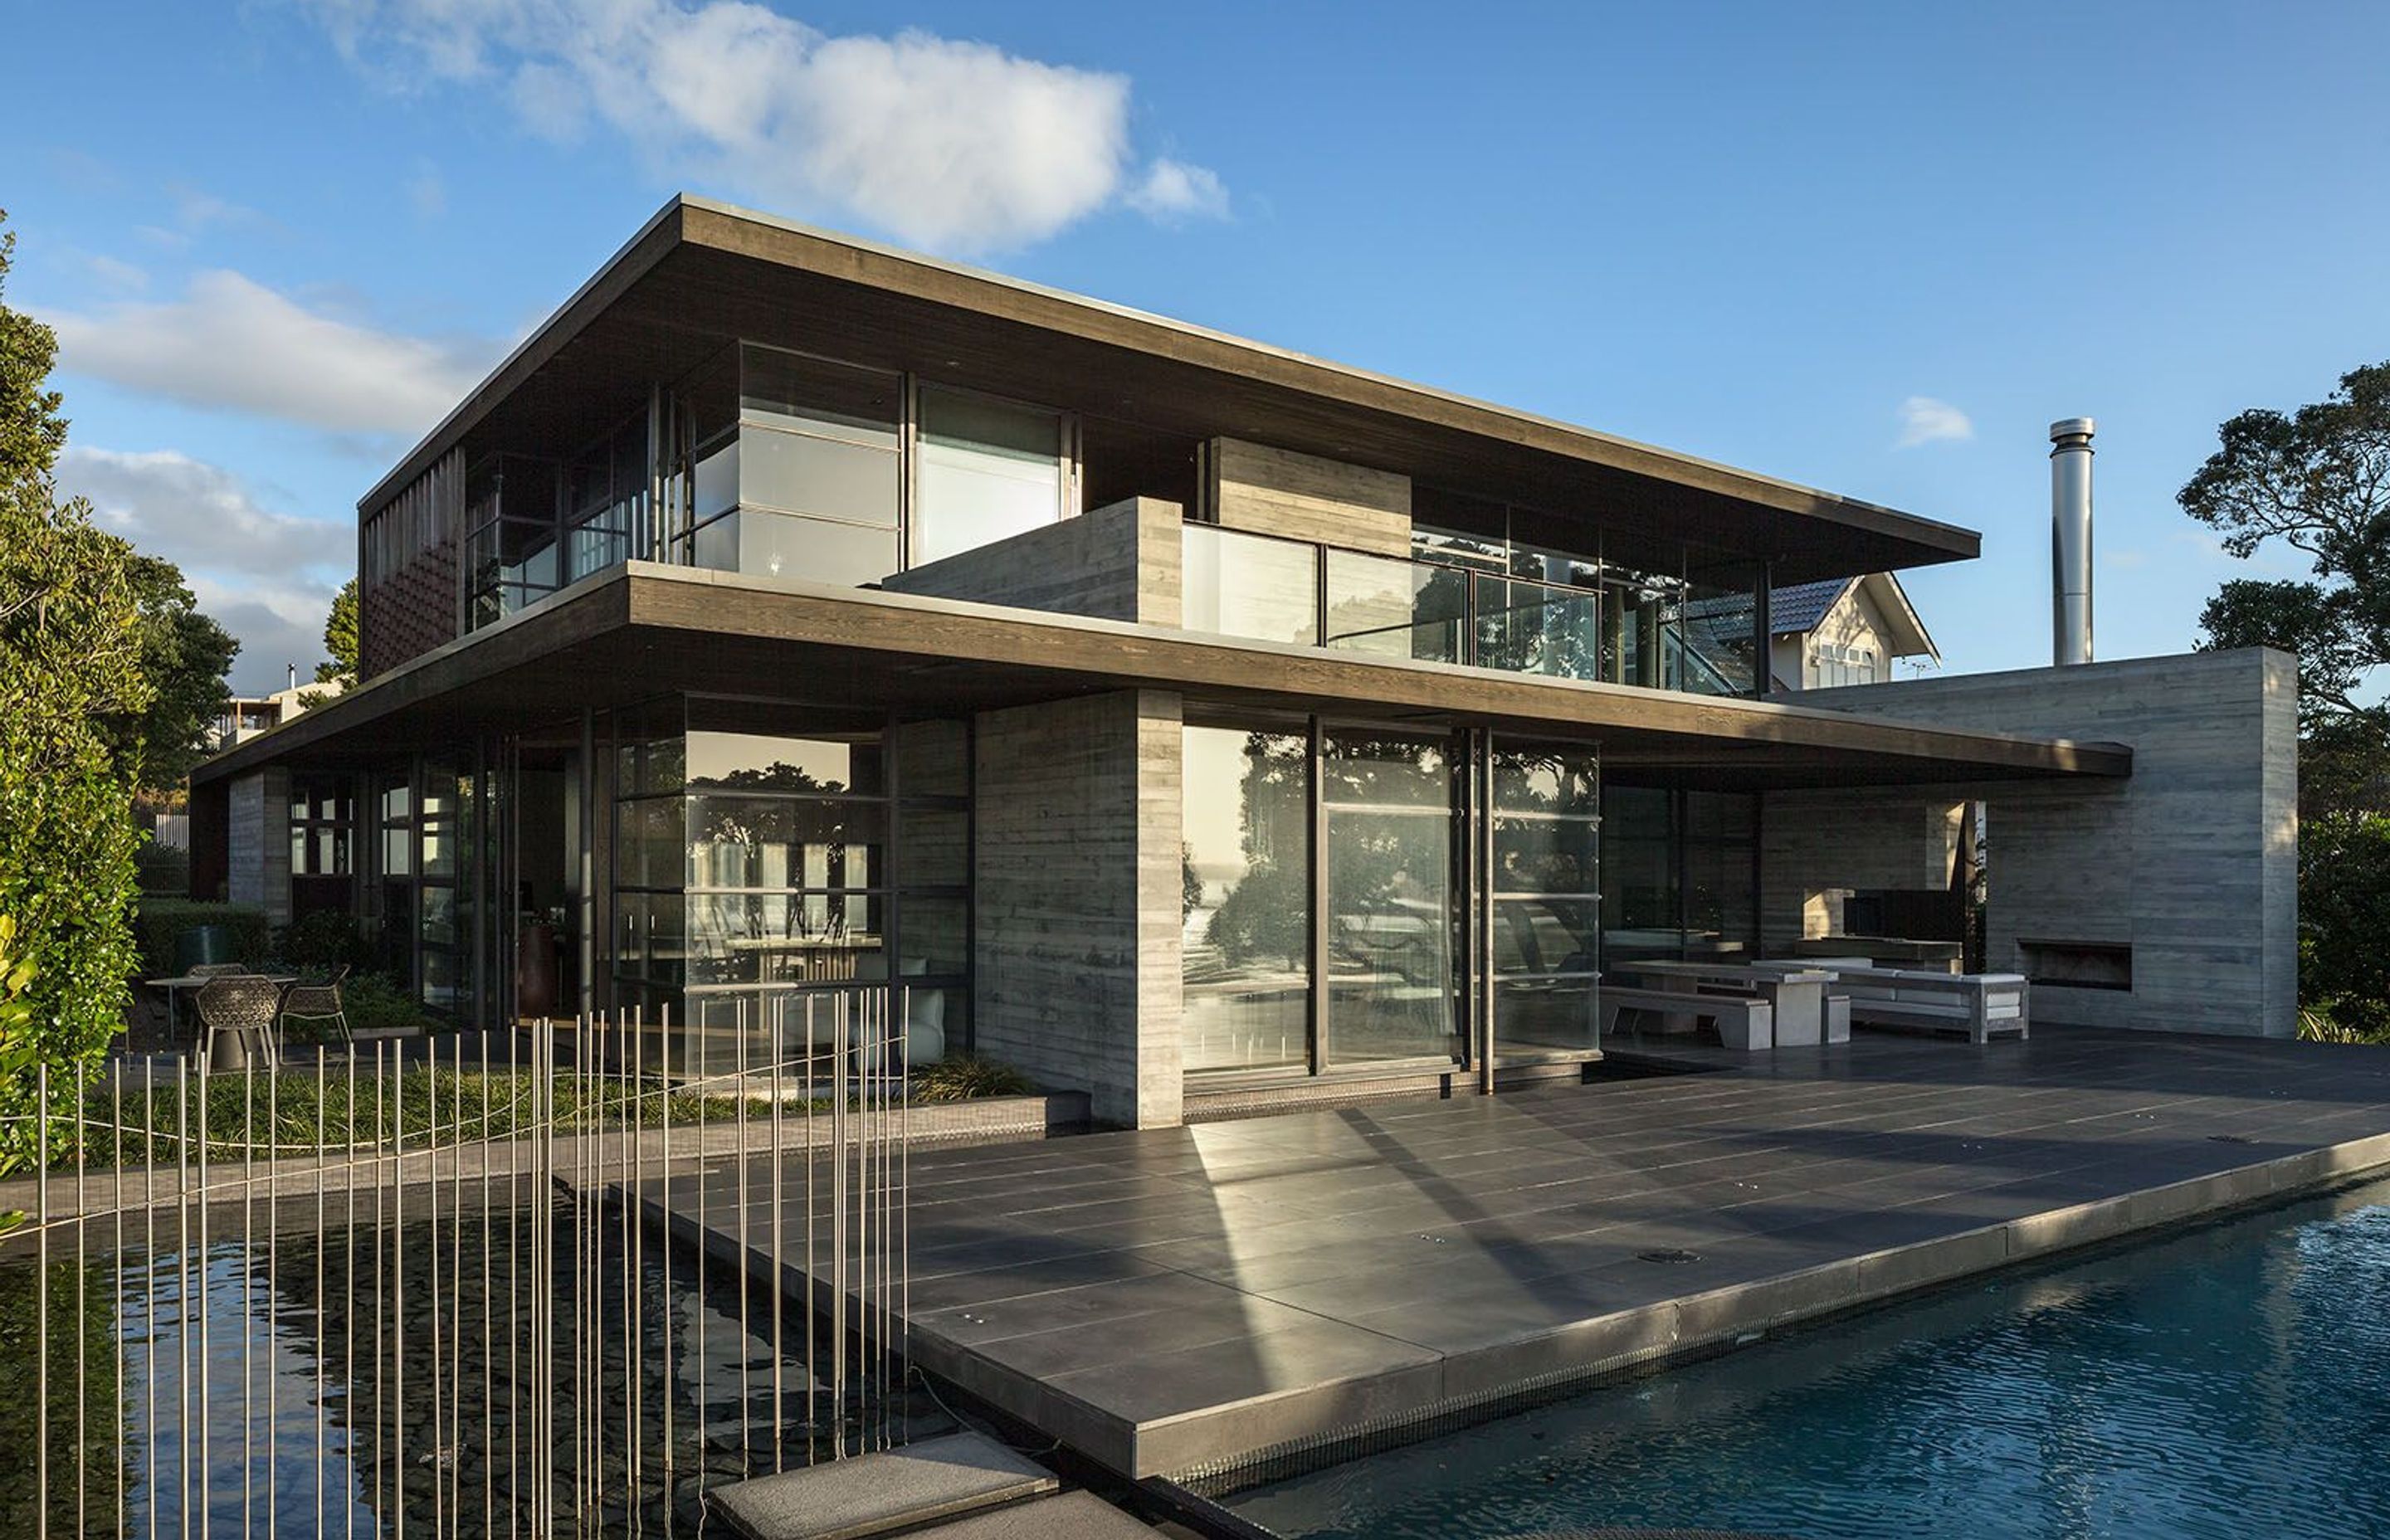 This Westmere home built by Bannan Construction features extensive in situ concrete.